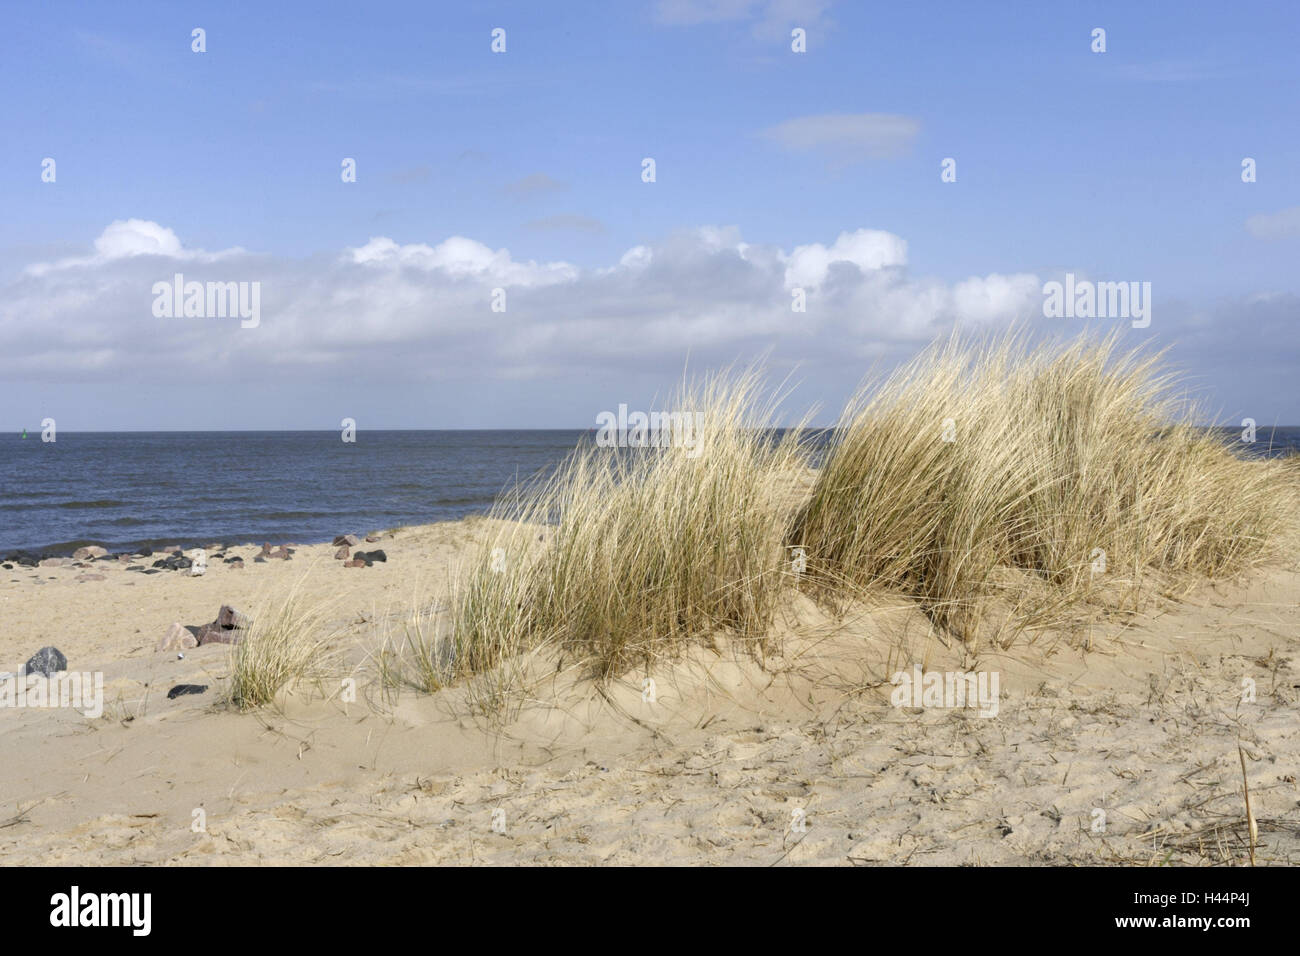 Germany, Lower Saxony, North Sea coast, Sand dunes, dune grass, North Germany, coast, seashore, the North Sea, sea, dune, heaven, blue, clouds, nature, rest, vacation, recreation, scenery, national park, nature reserve, dune grass, grass bundle, beach, sandy beach, nobody, nature conservation, Stock Photo